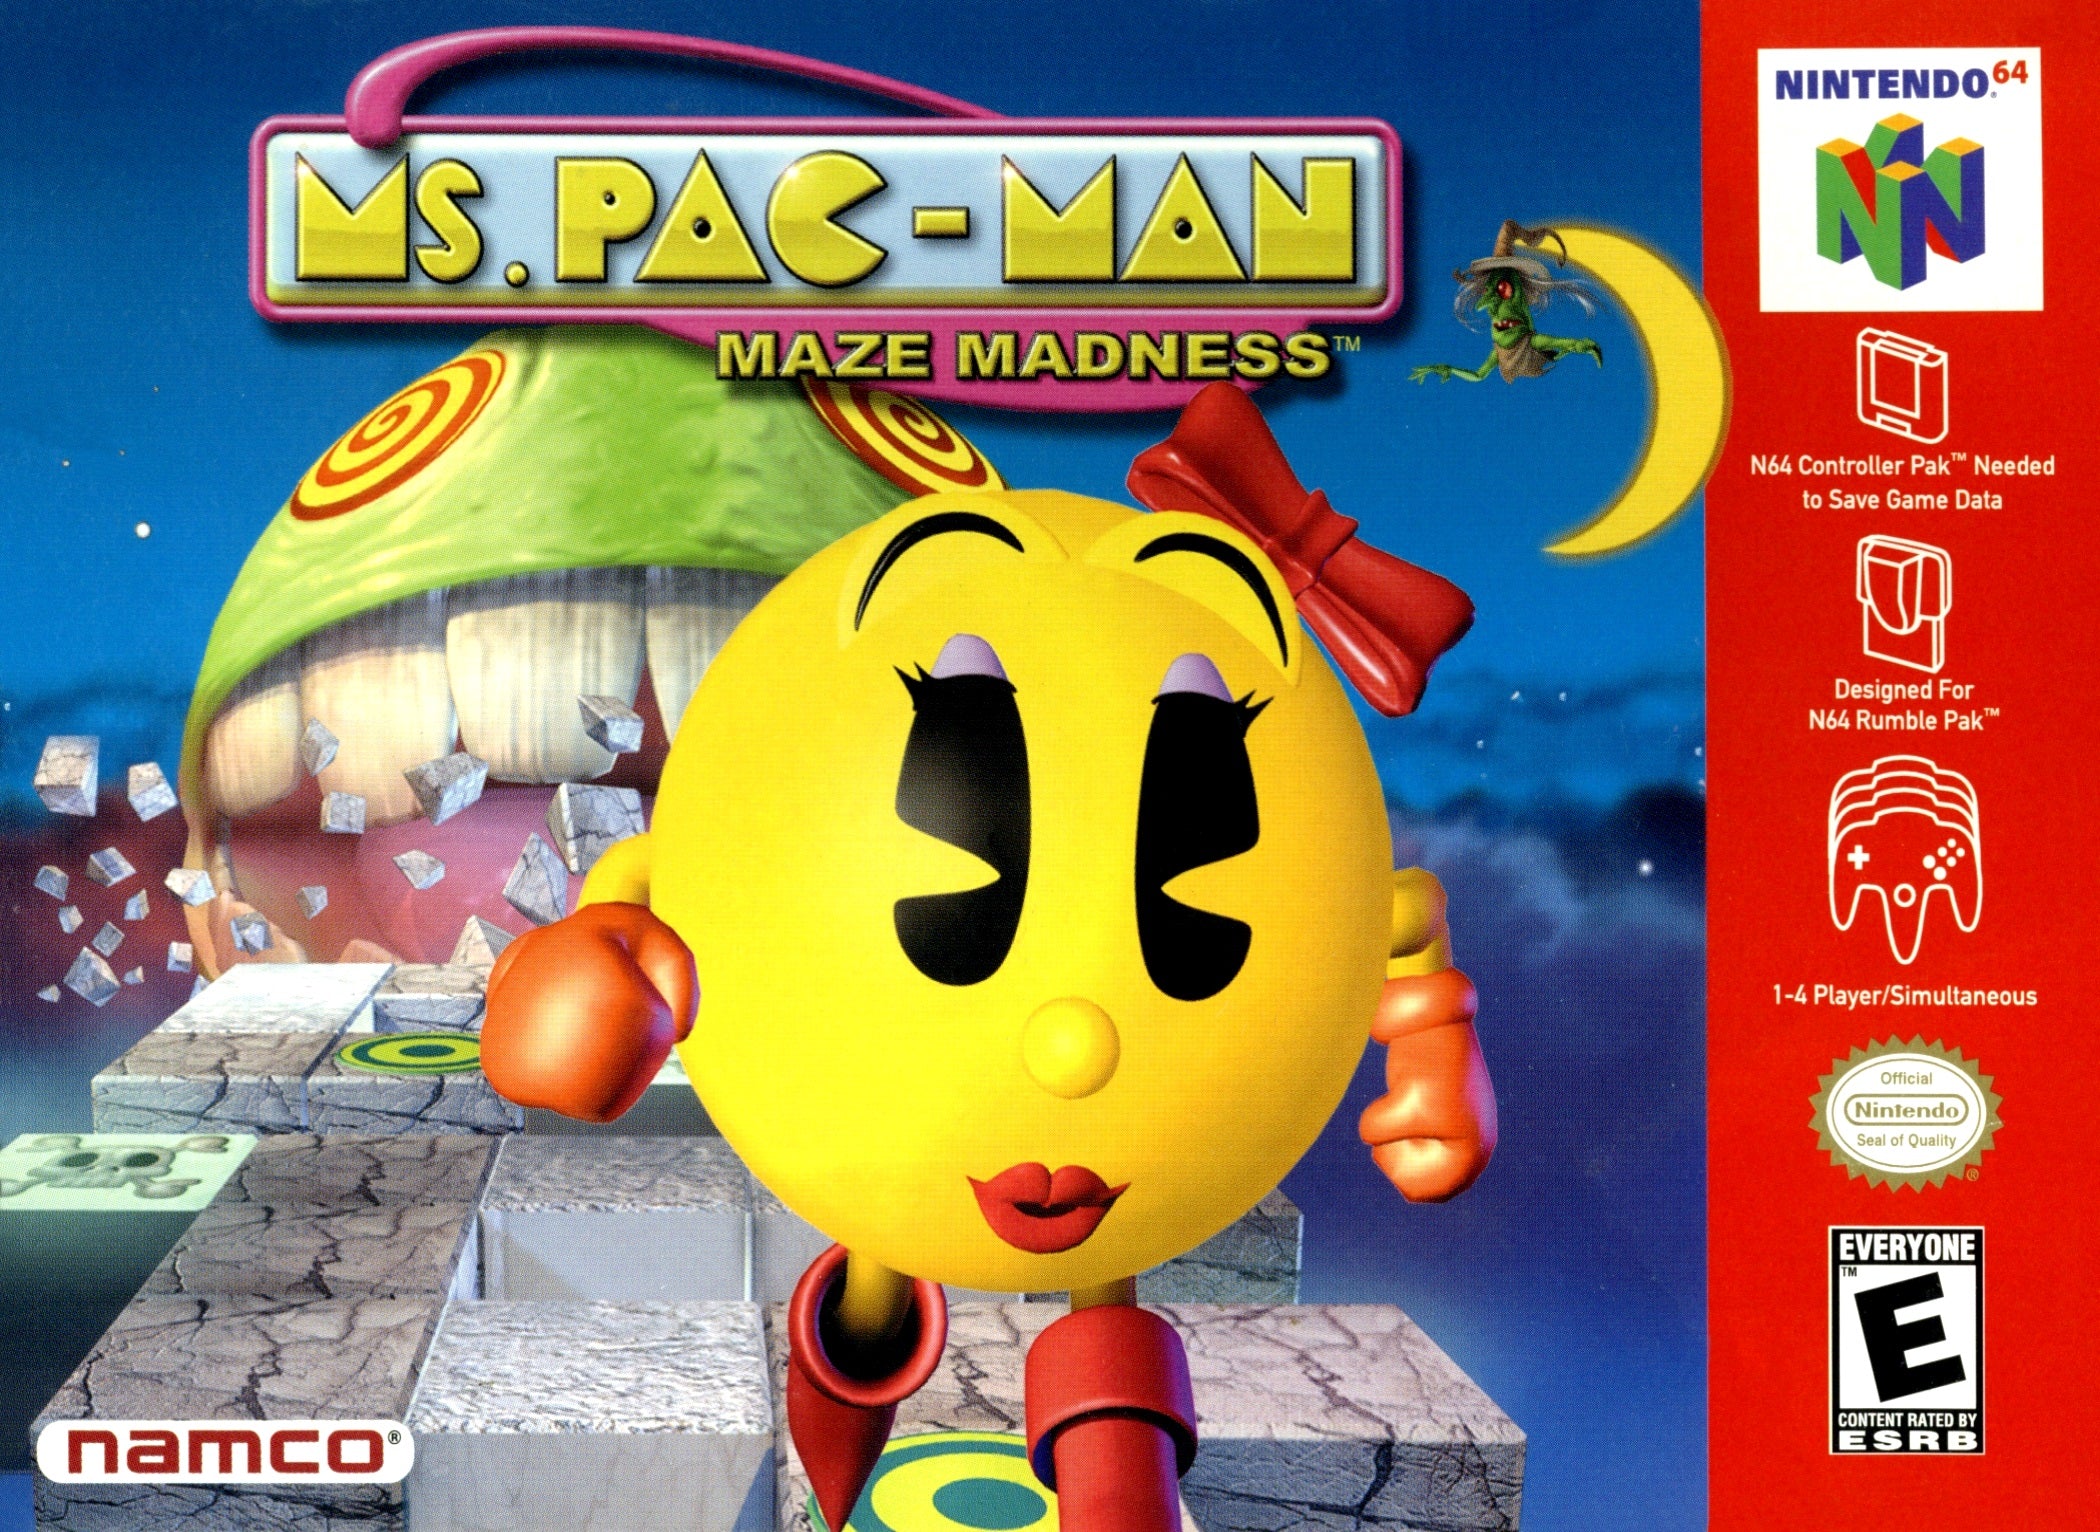 Ms. Pac-Man: Maze Madness - Authentic Nintendo 64 (N64) Game Cartridge